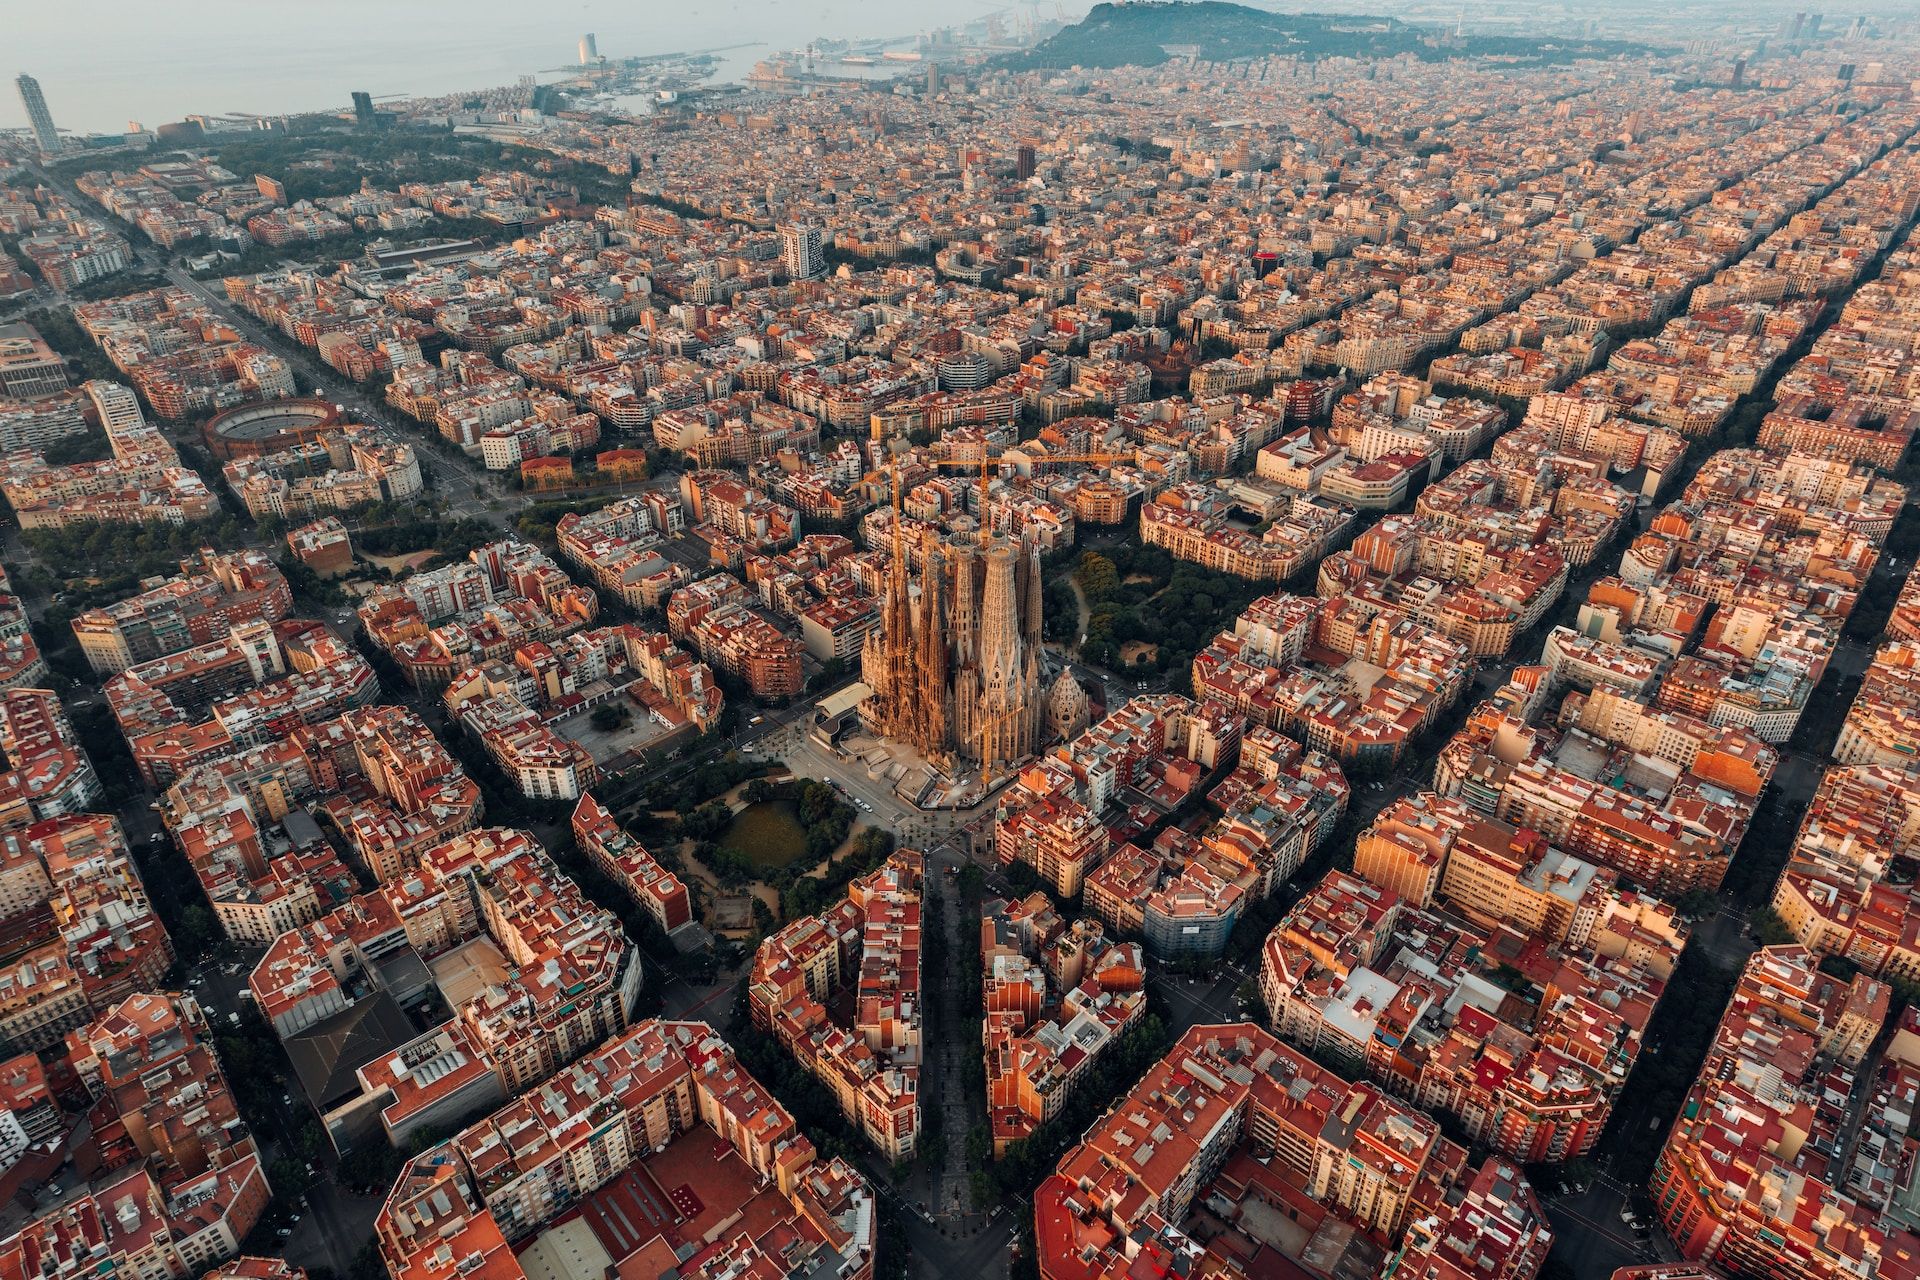 Barcelona or Madrid: Which One To Choose For A Few Days?